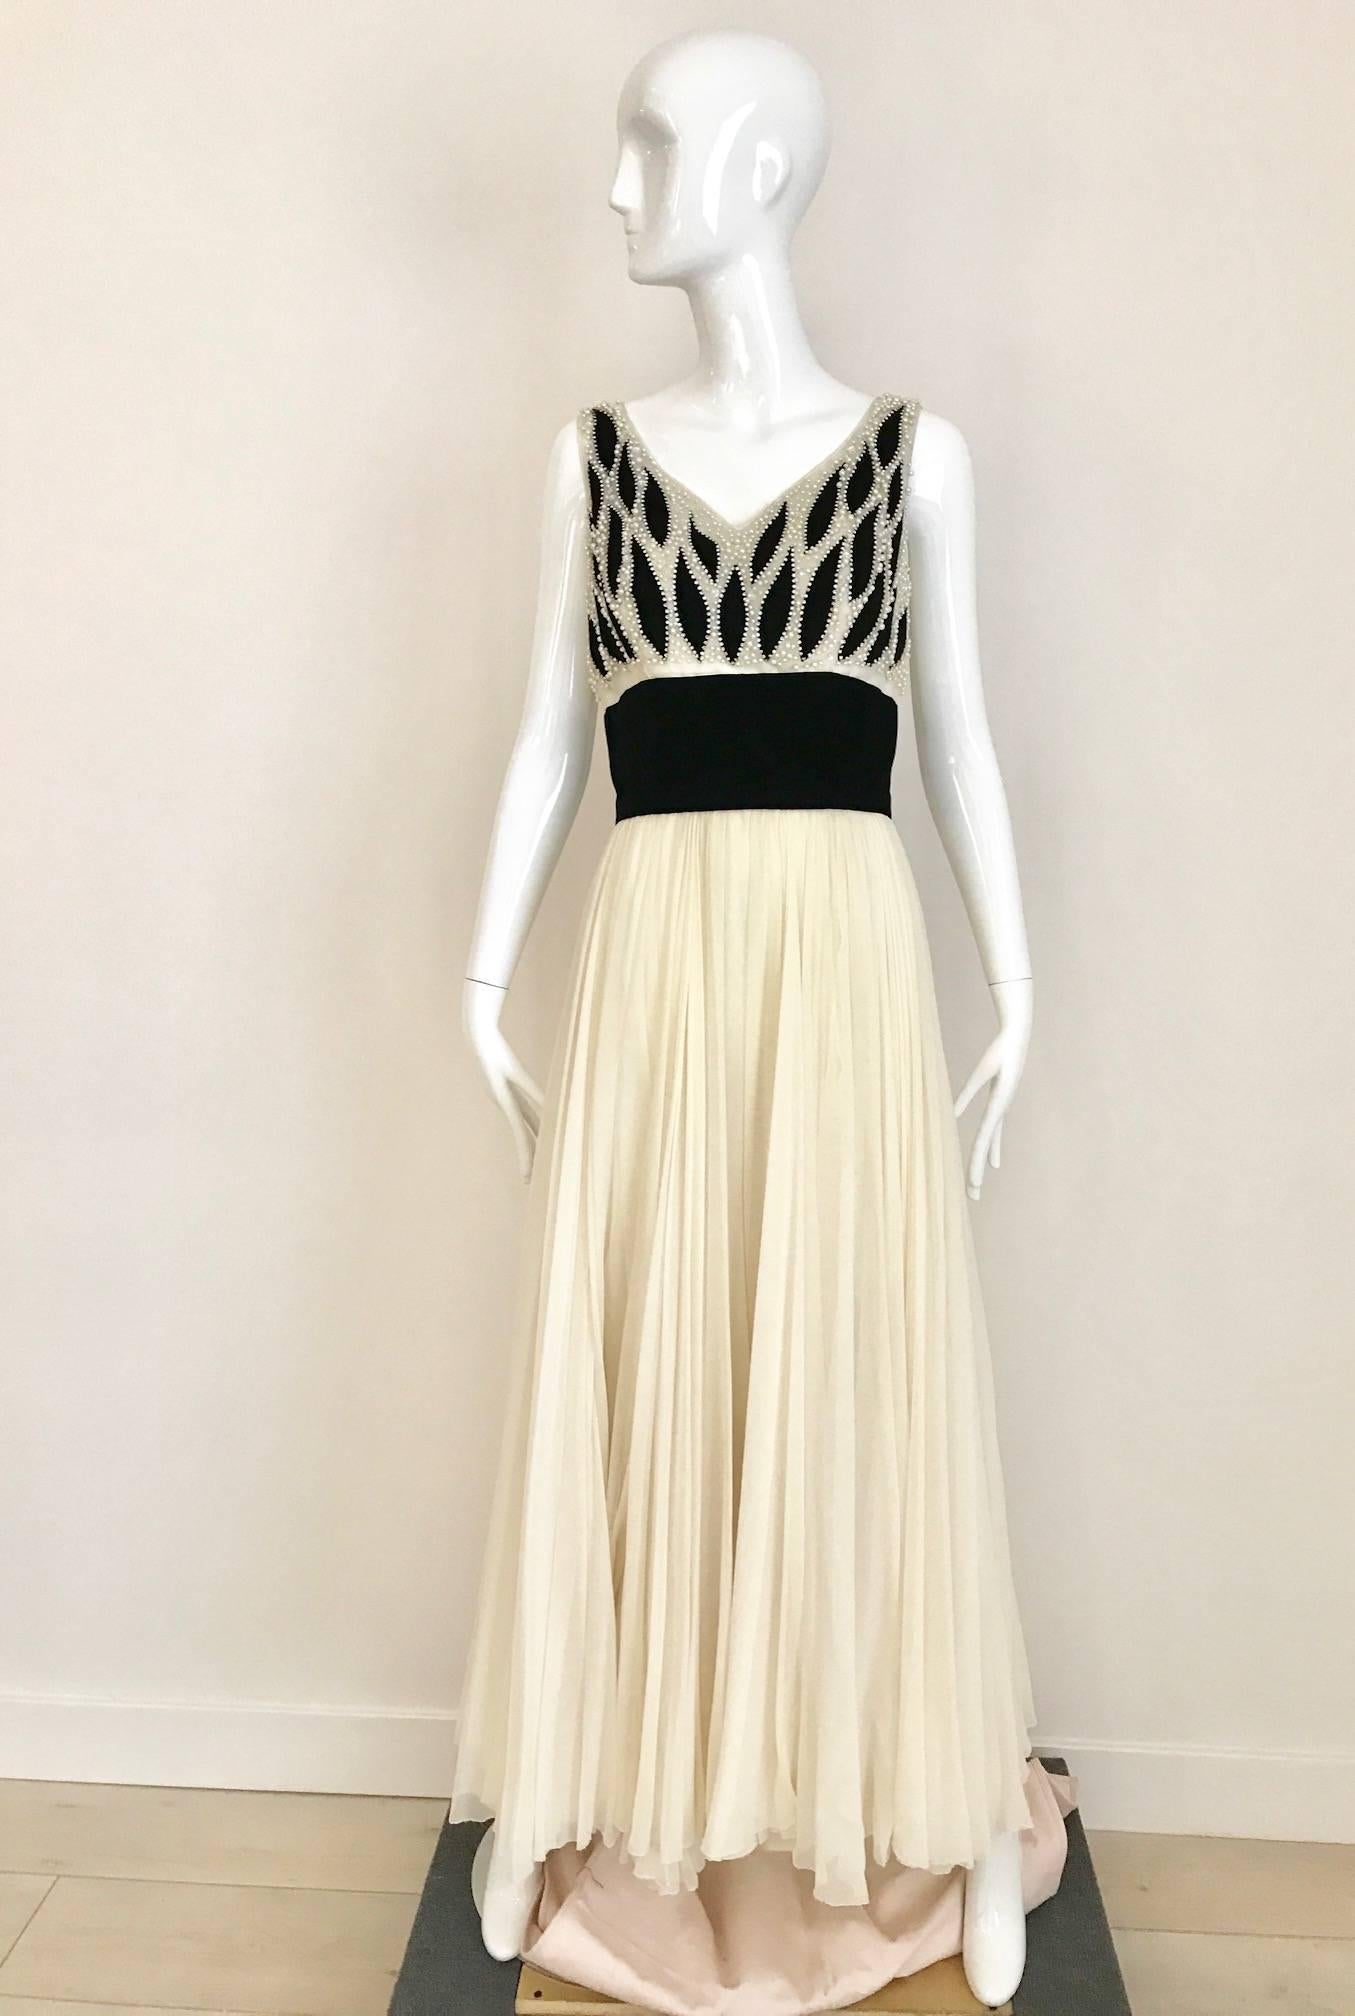 This vintage Phillip Hulitar 1950s, ivory silk chiffon and black velvet cocktail dress is the perfect party dress or great for wedding. Gown has intricate black velvet, ivory silk chiffon, pearl encrusted, leaf-motif bodice and its double-layer,